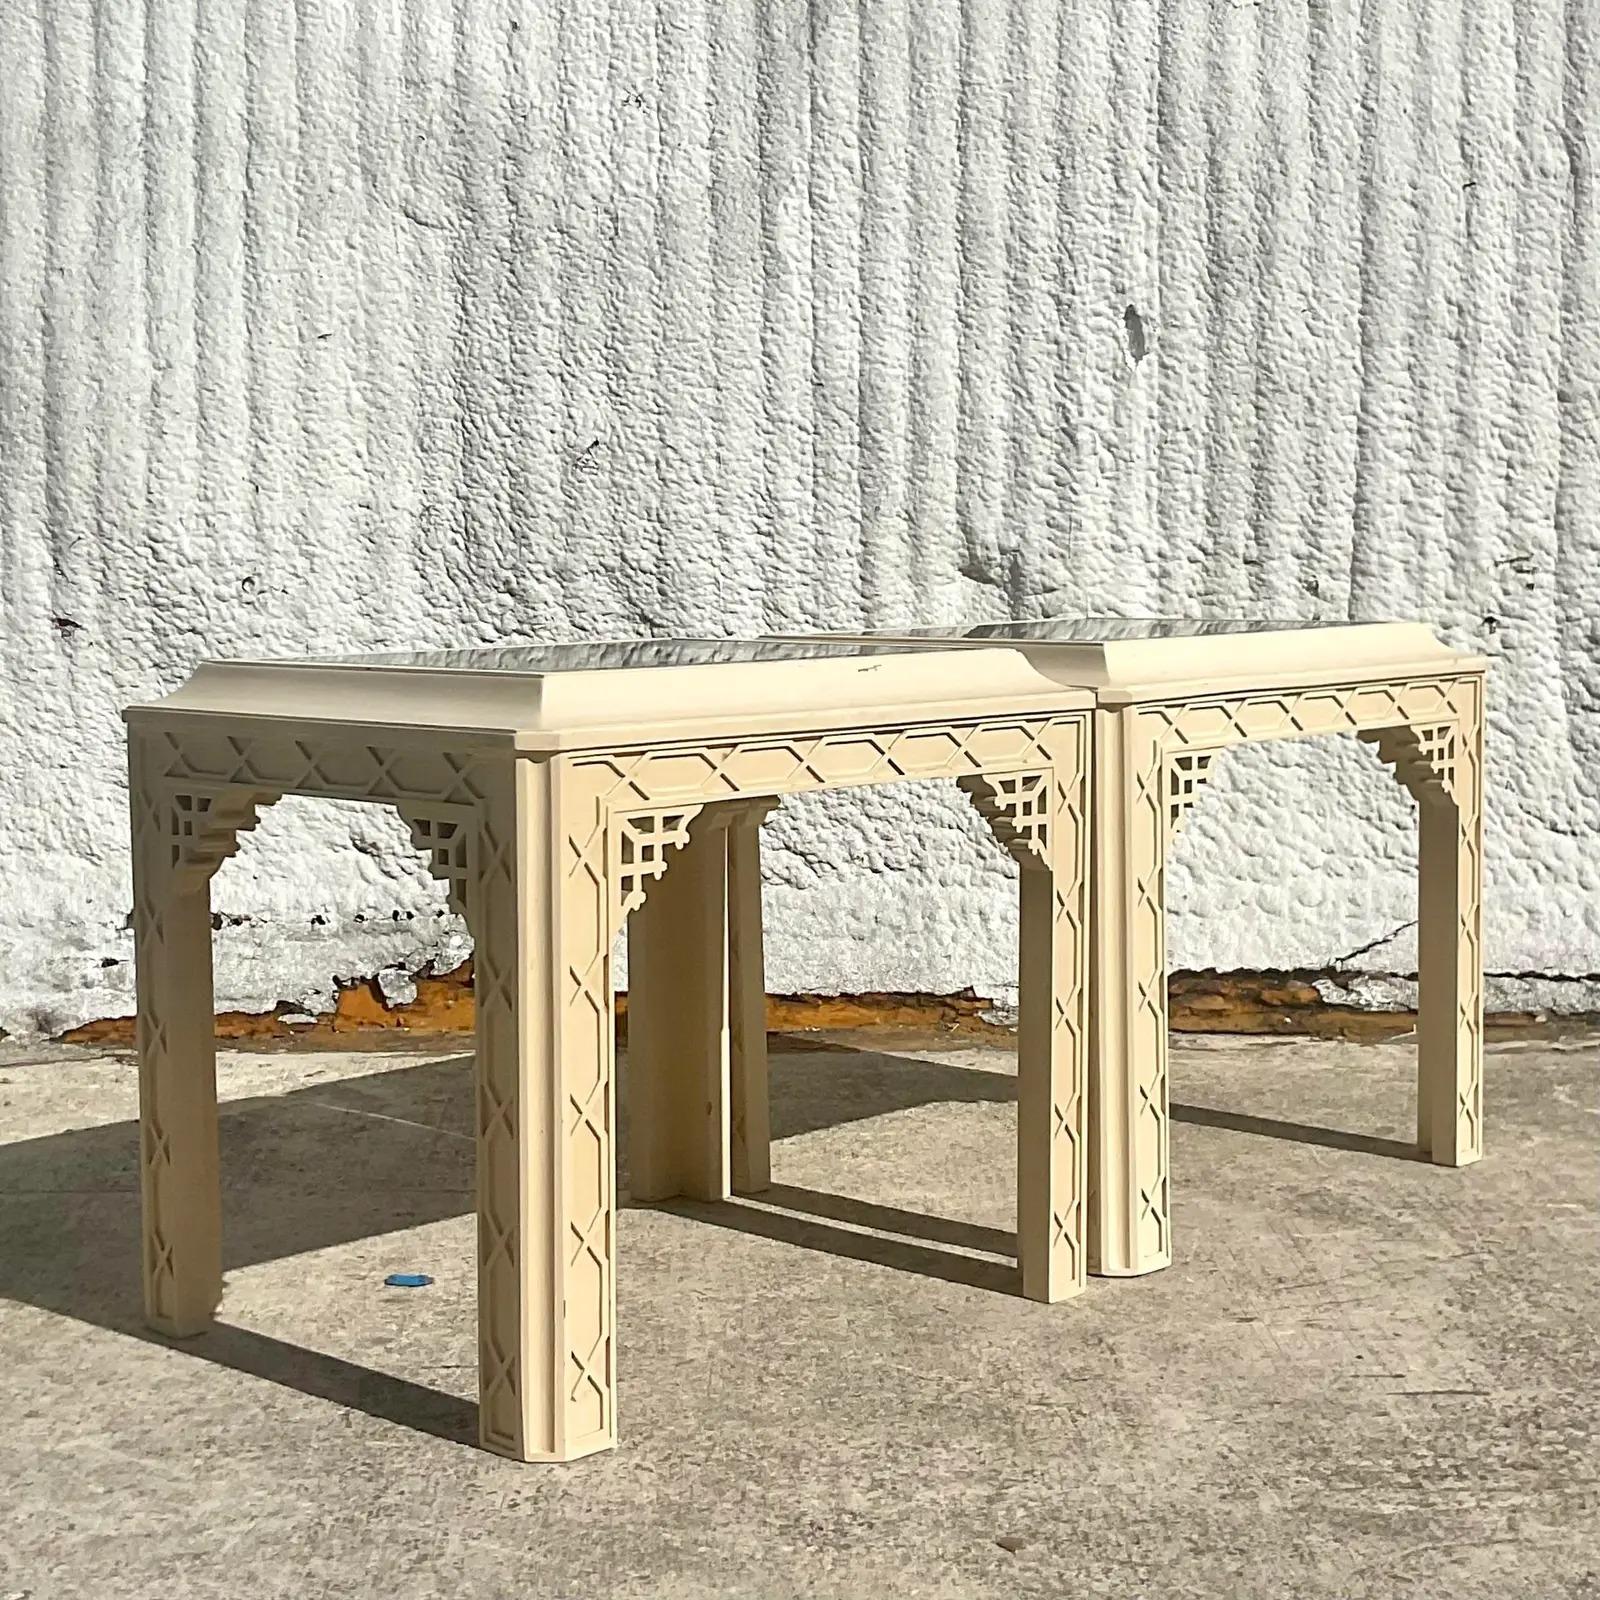 A fabulous pair of vintage Regency side tables. Chic pagoda style with gorgeous fretwork detail. Inset smoked mirror top for extra glamour. Acquired from a Palm Beach estate.